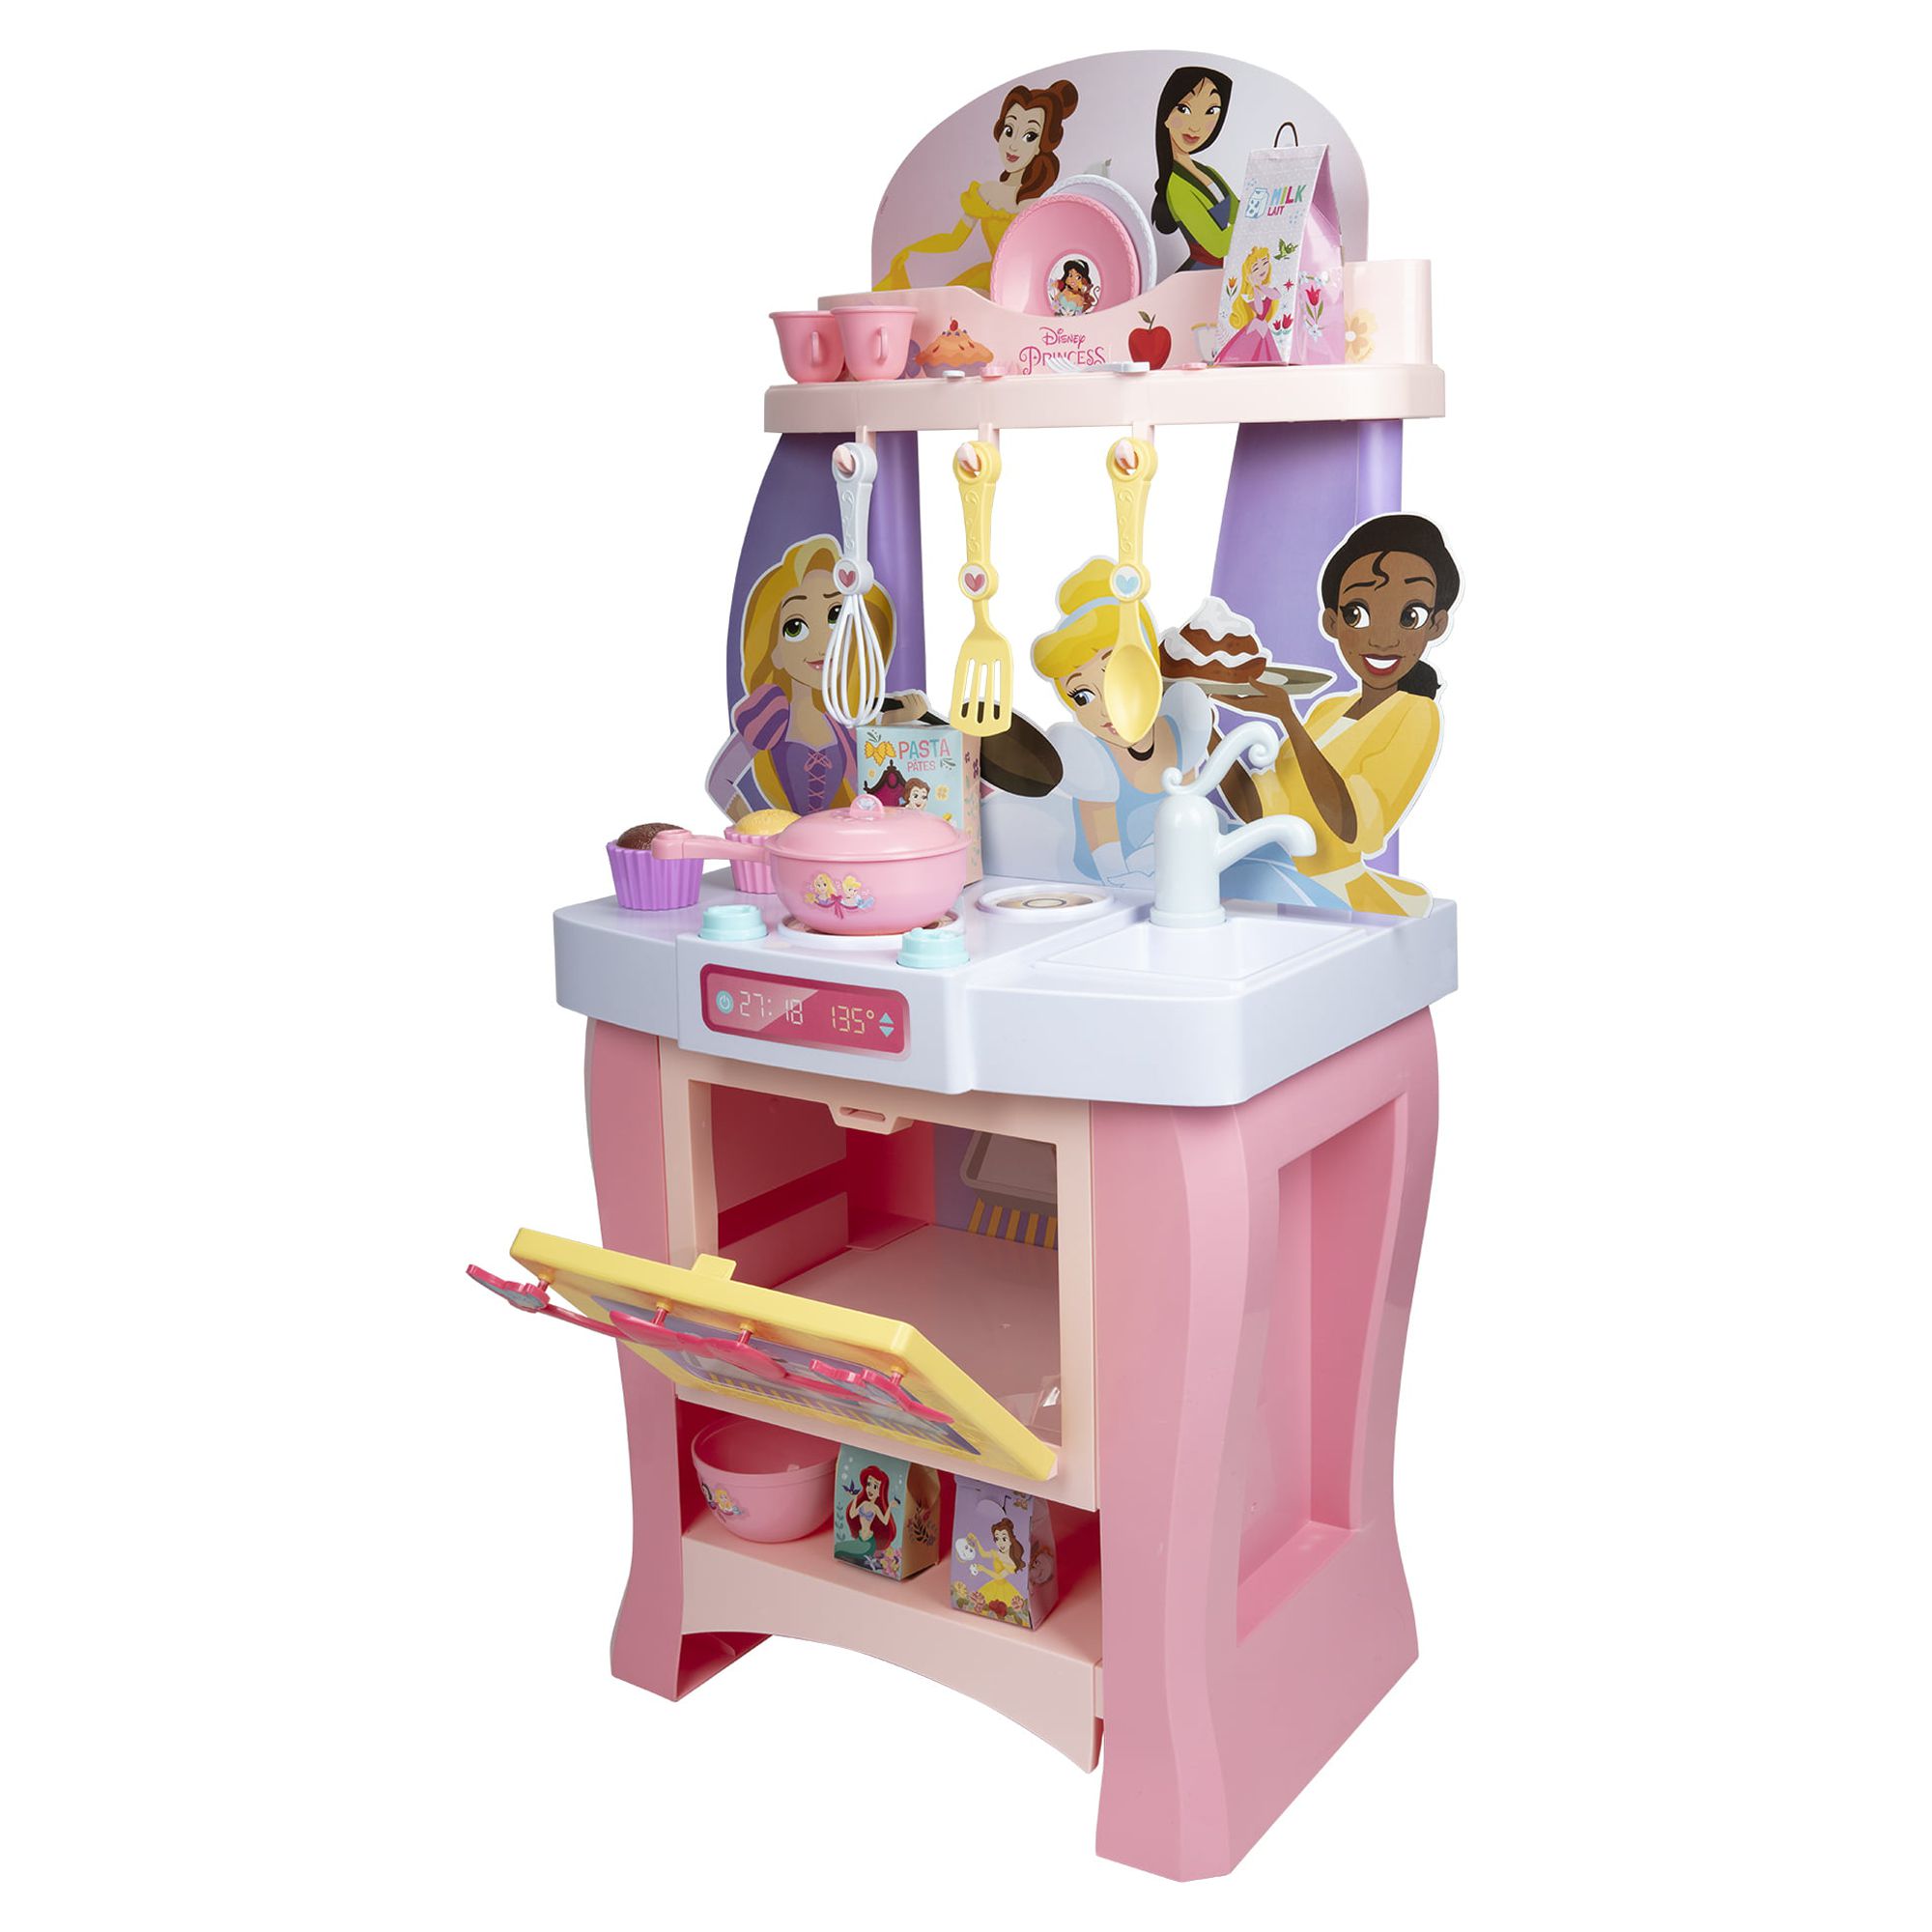 Disney Princess Play Kitchen Includes 20 Accessories, over 3 Feet Tall - image 4 of 6